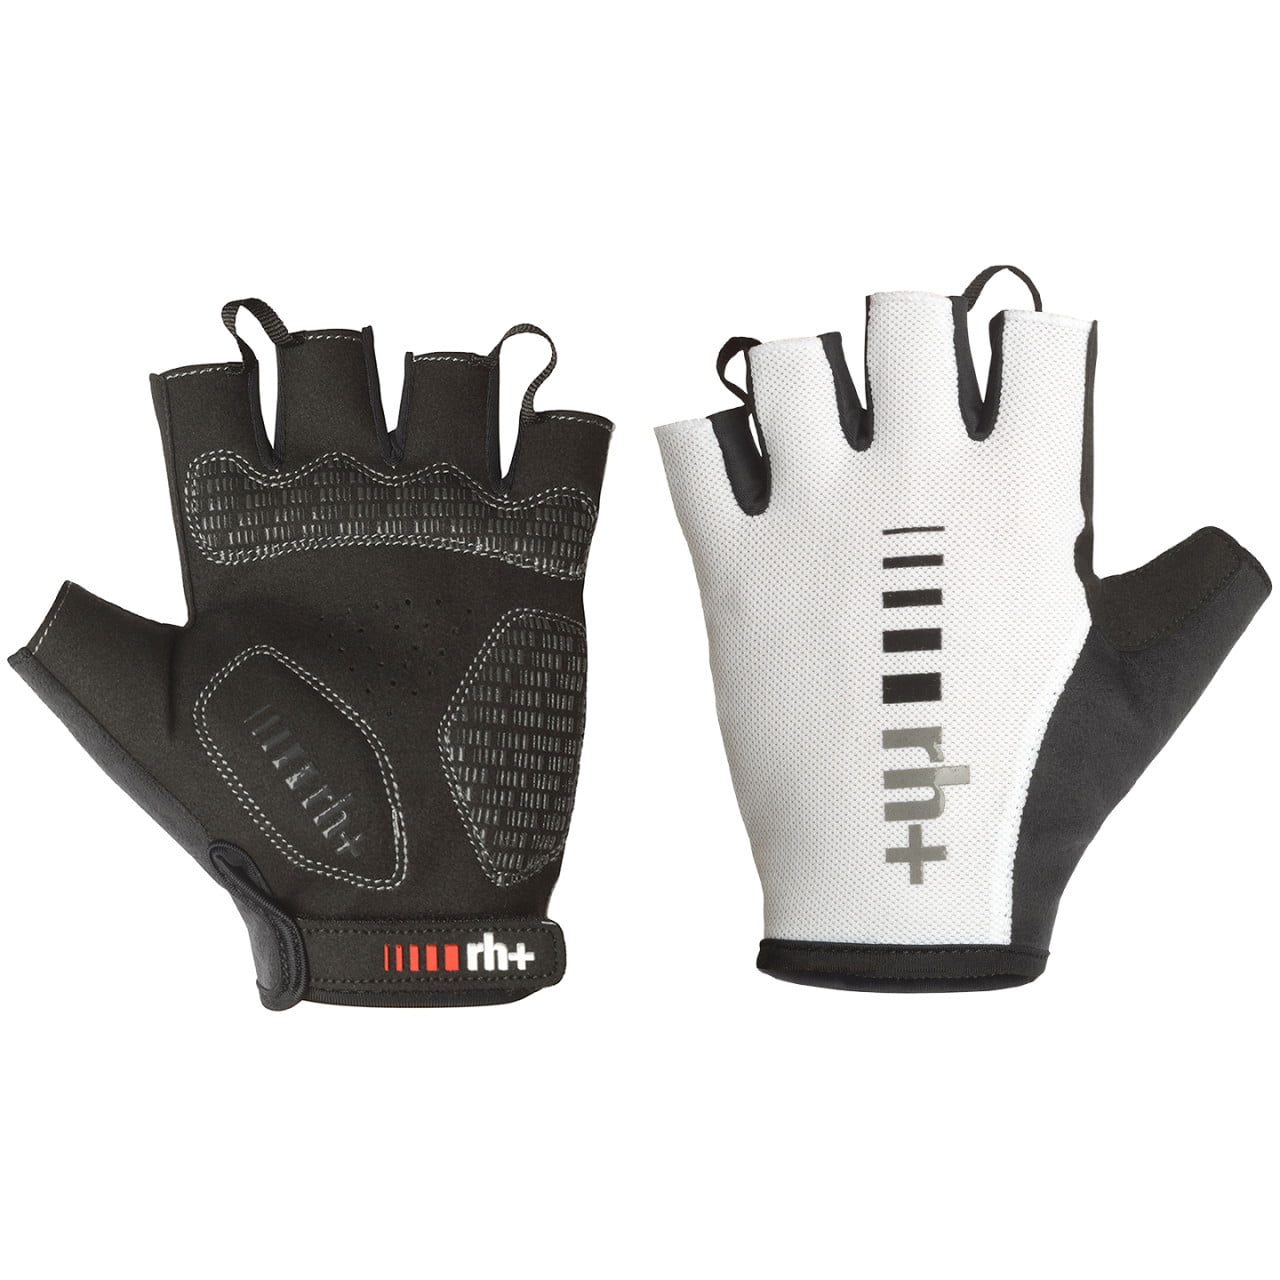 Guantes rh+ New Code